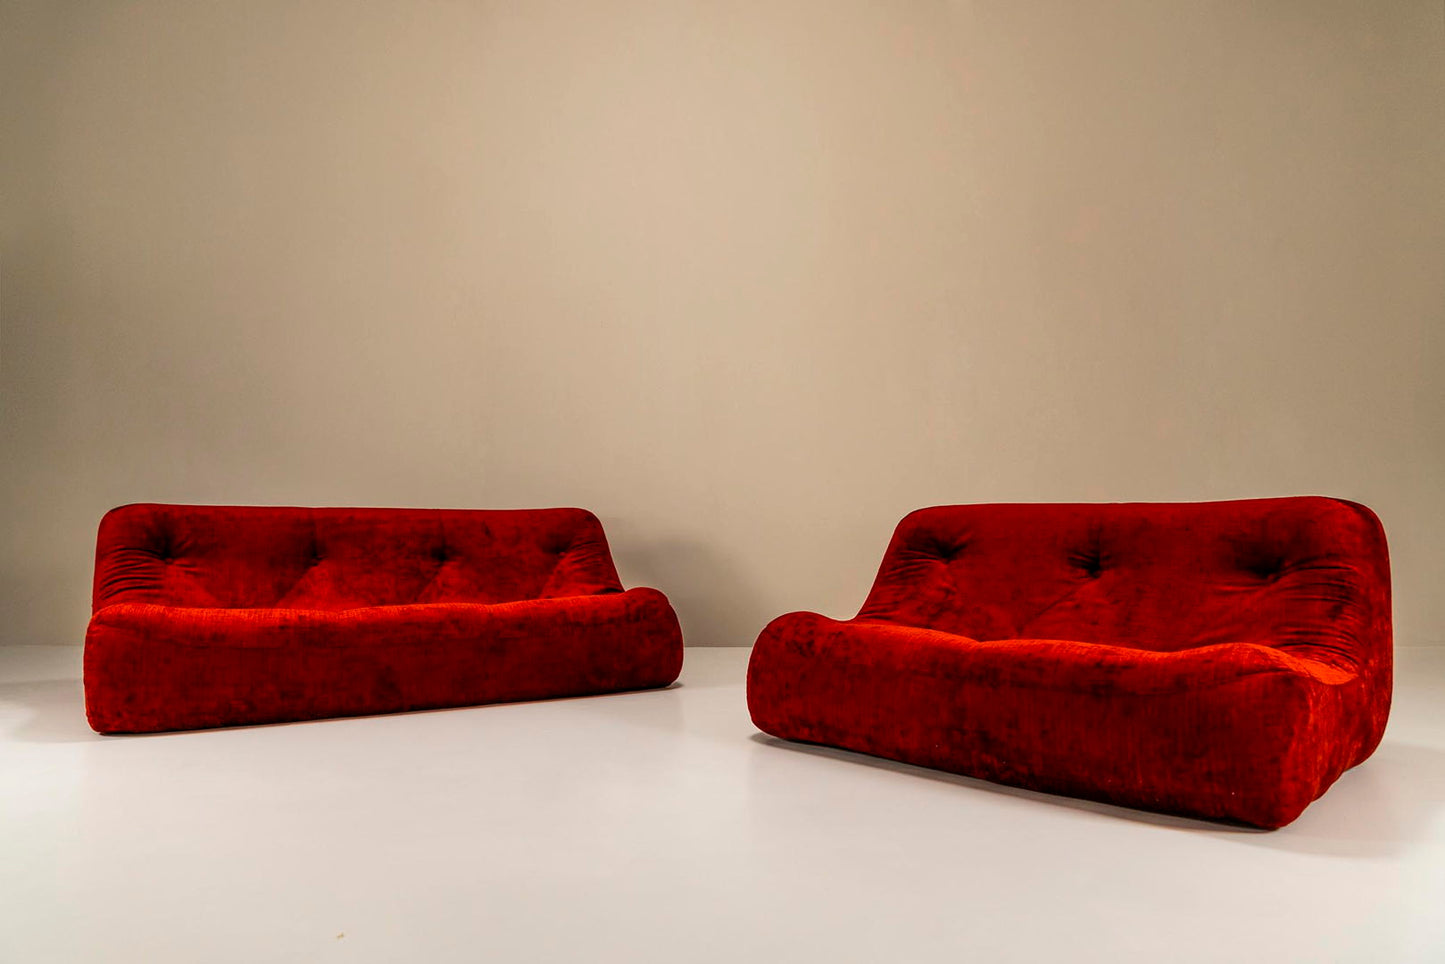 Three-seater And Two-Seater Model 'Kali' By Michel Ducaroy For Ligne Roset, France 1970s.